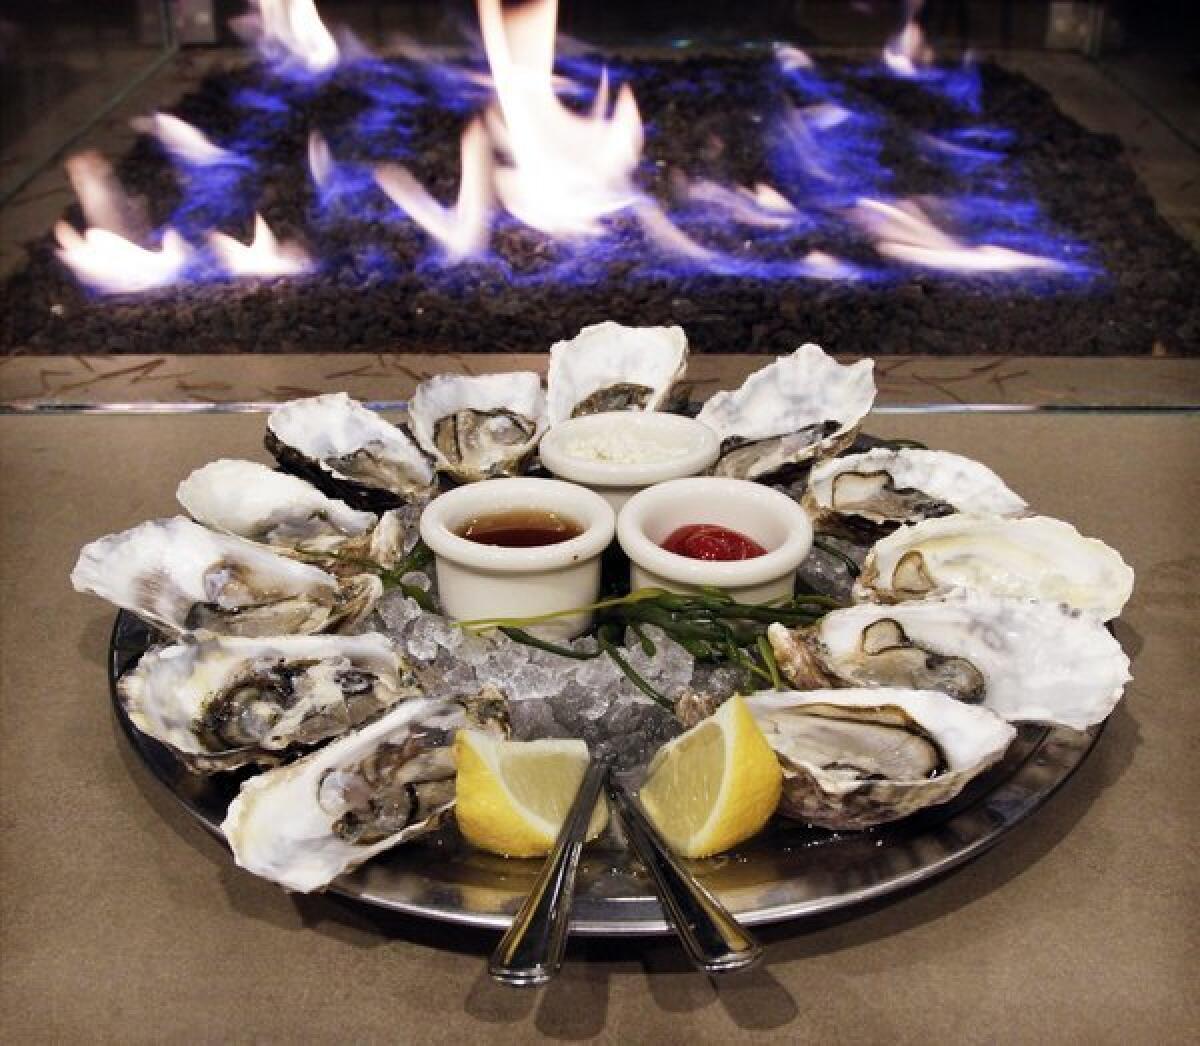 Messhall has introduced $1 oysters on Tuesday nights.